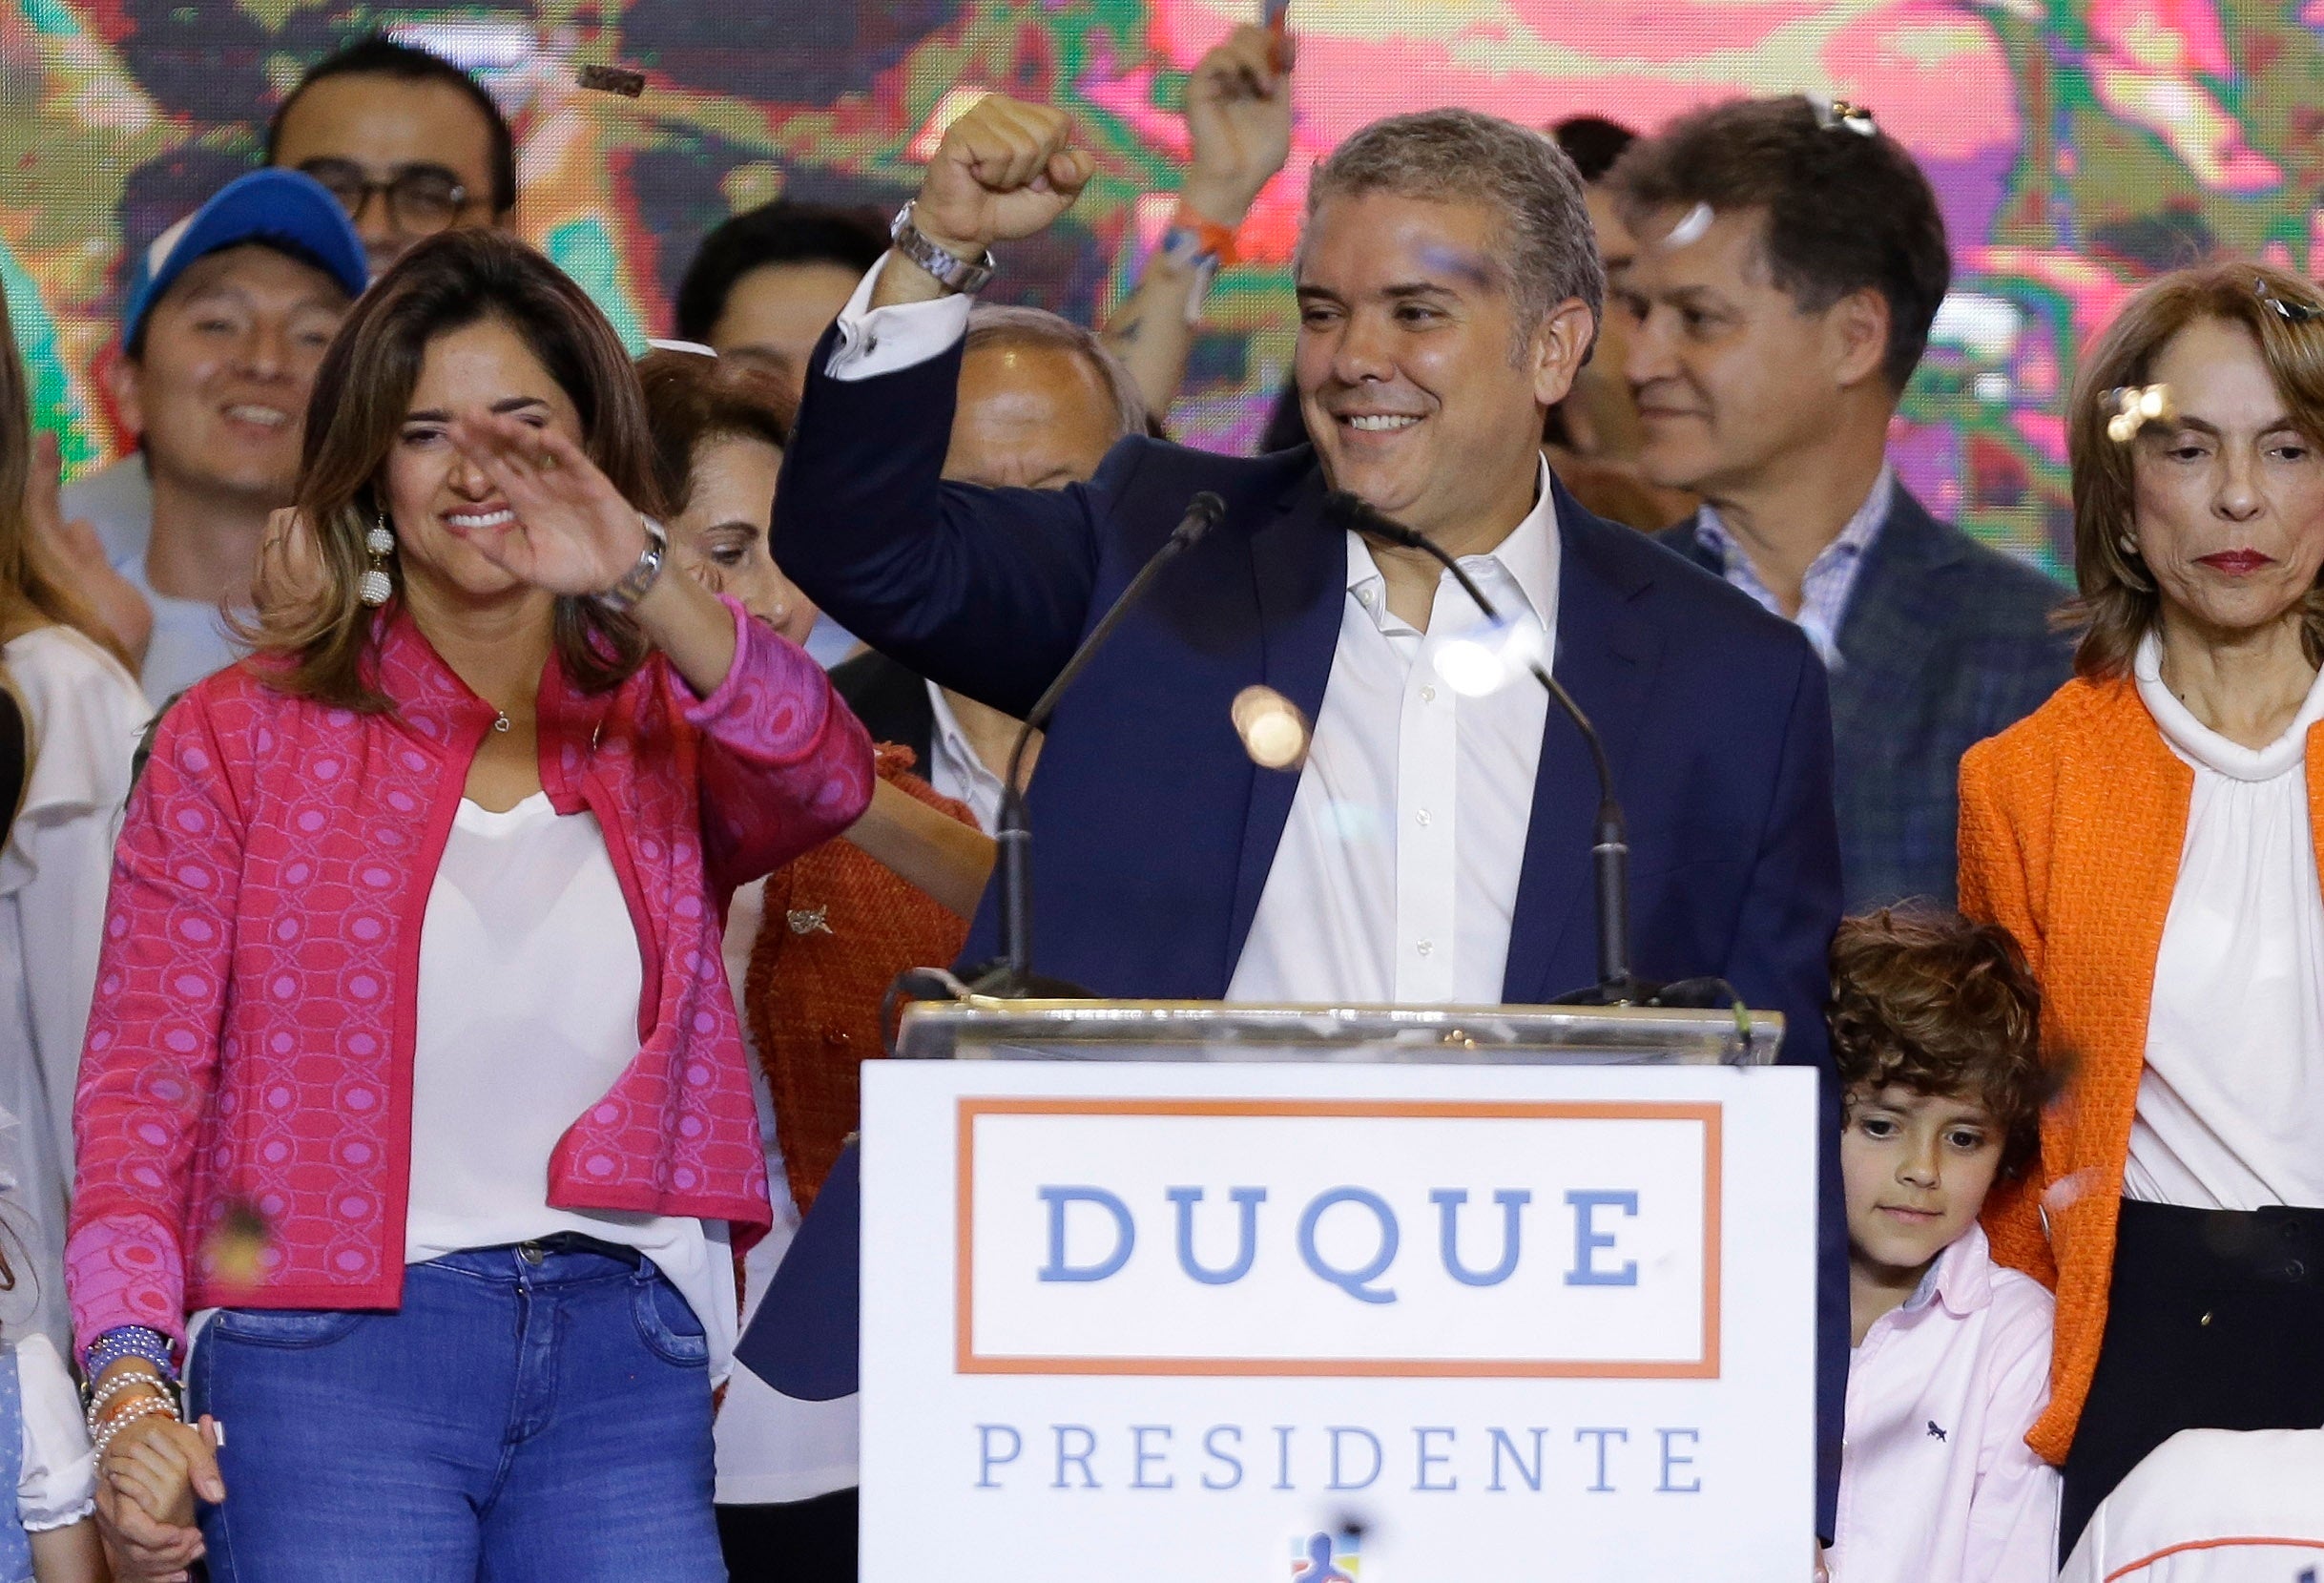 Ivan Duque celebrates his victory in the presidential runoff election